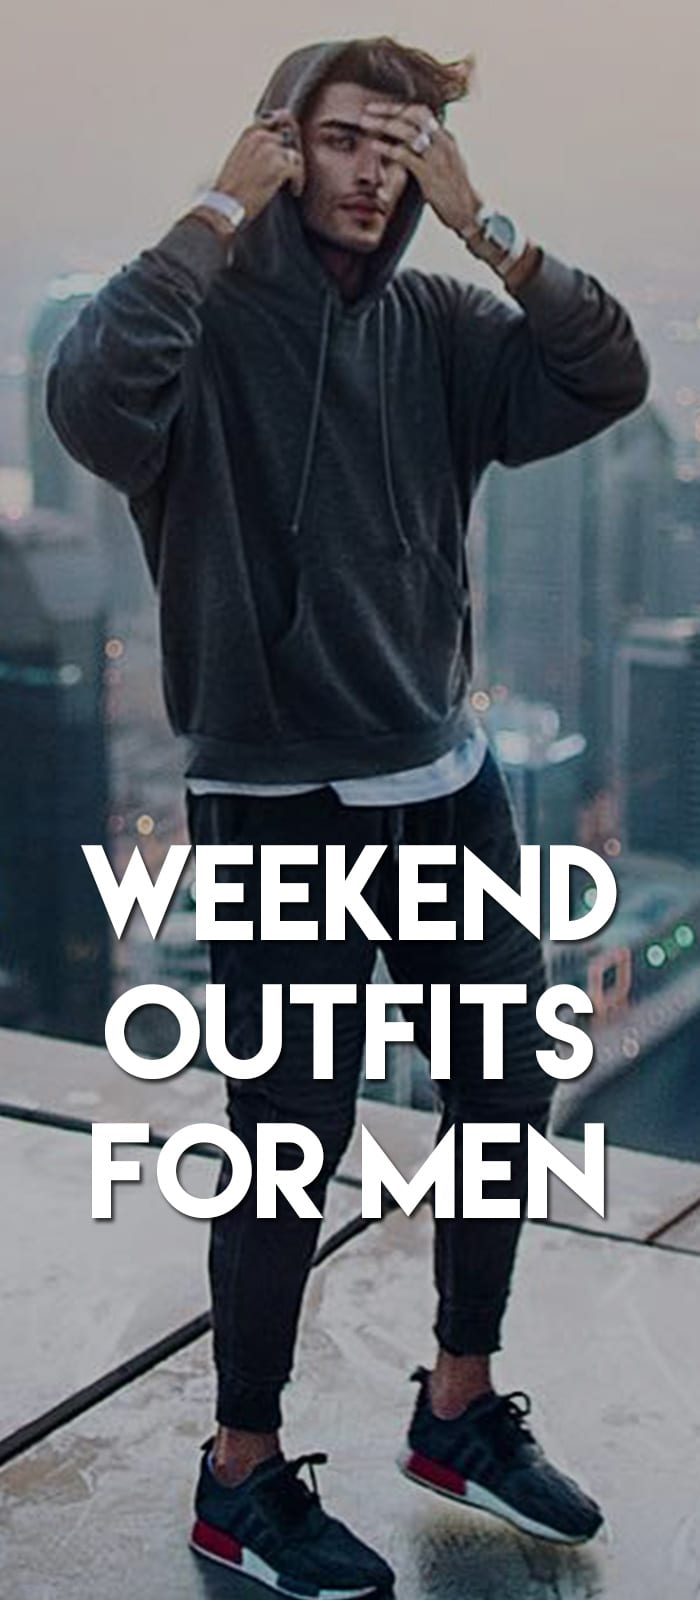 Weekend-Outfits-For-Men.